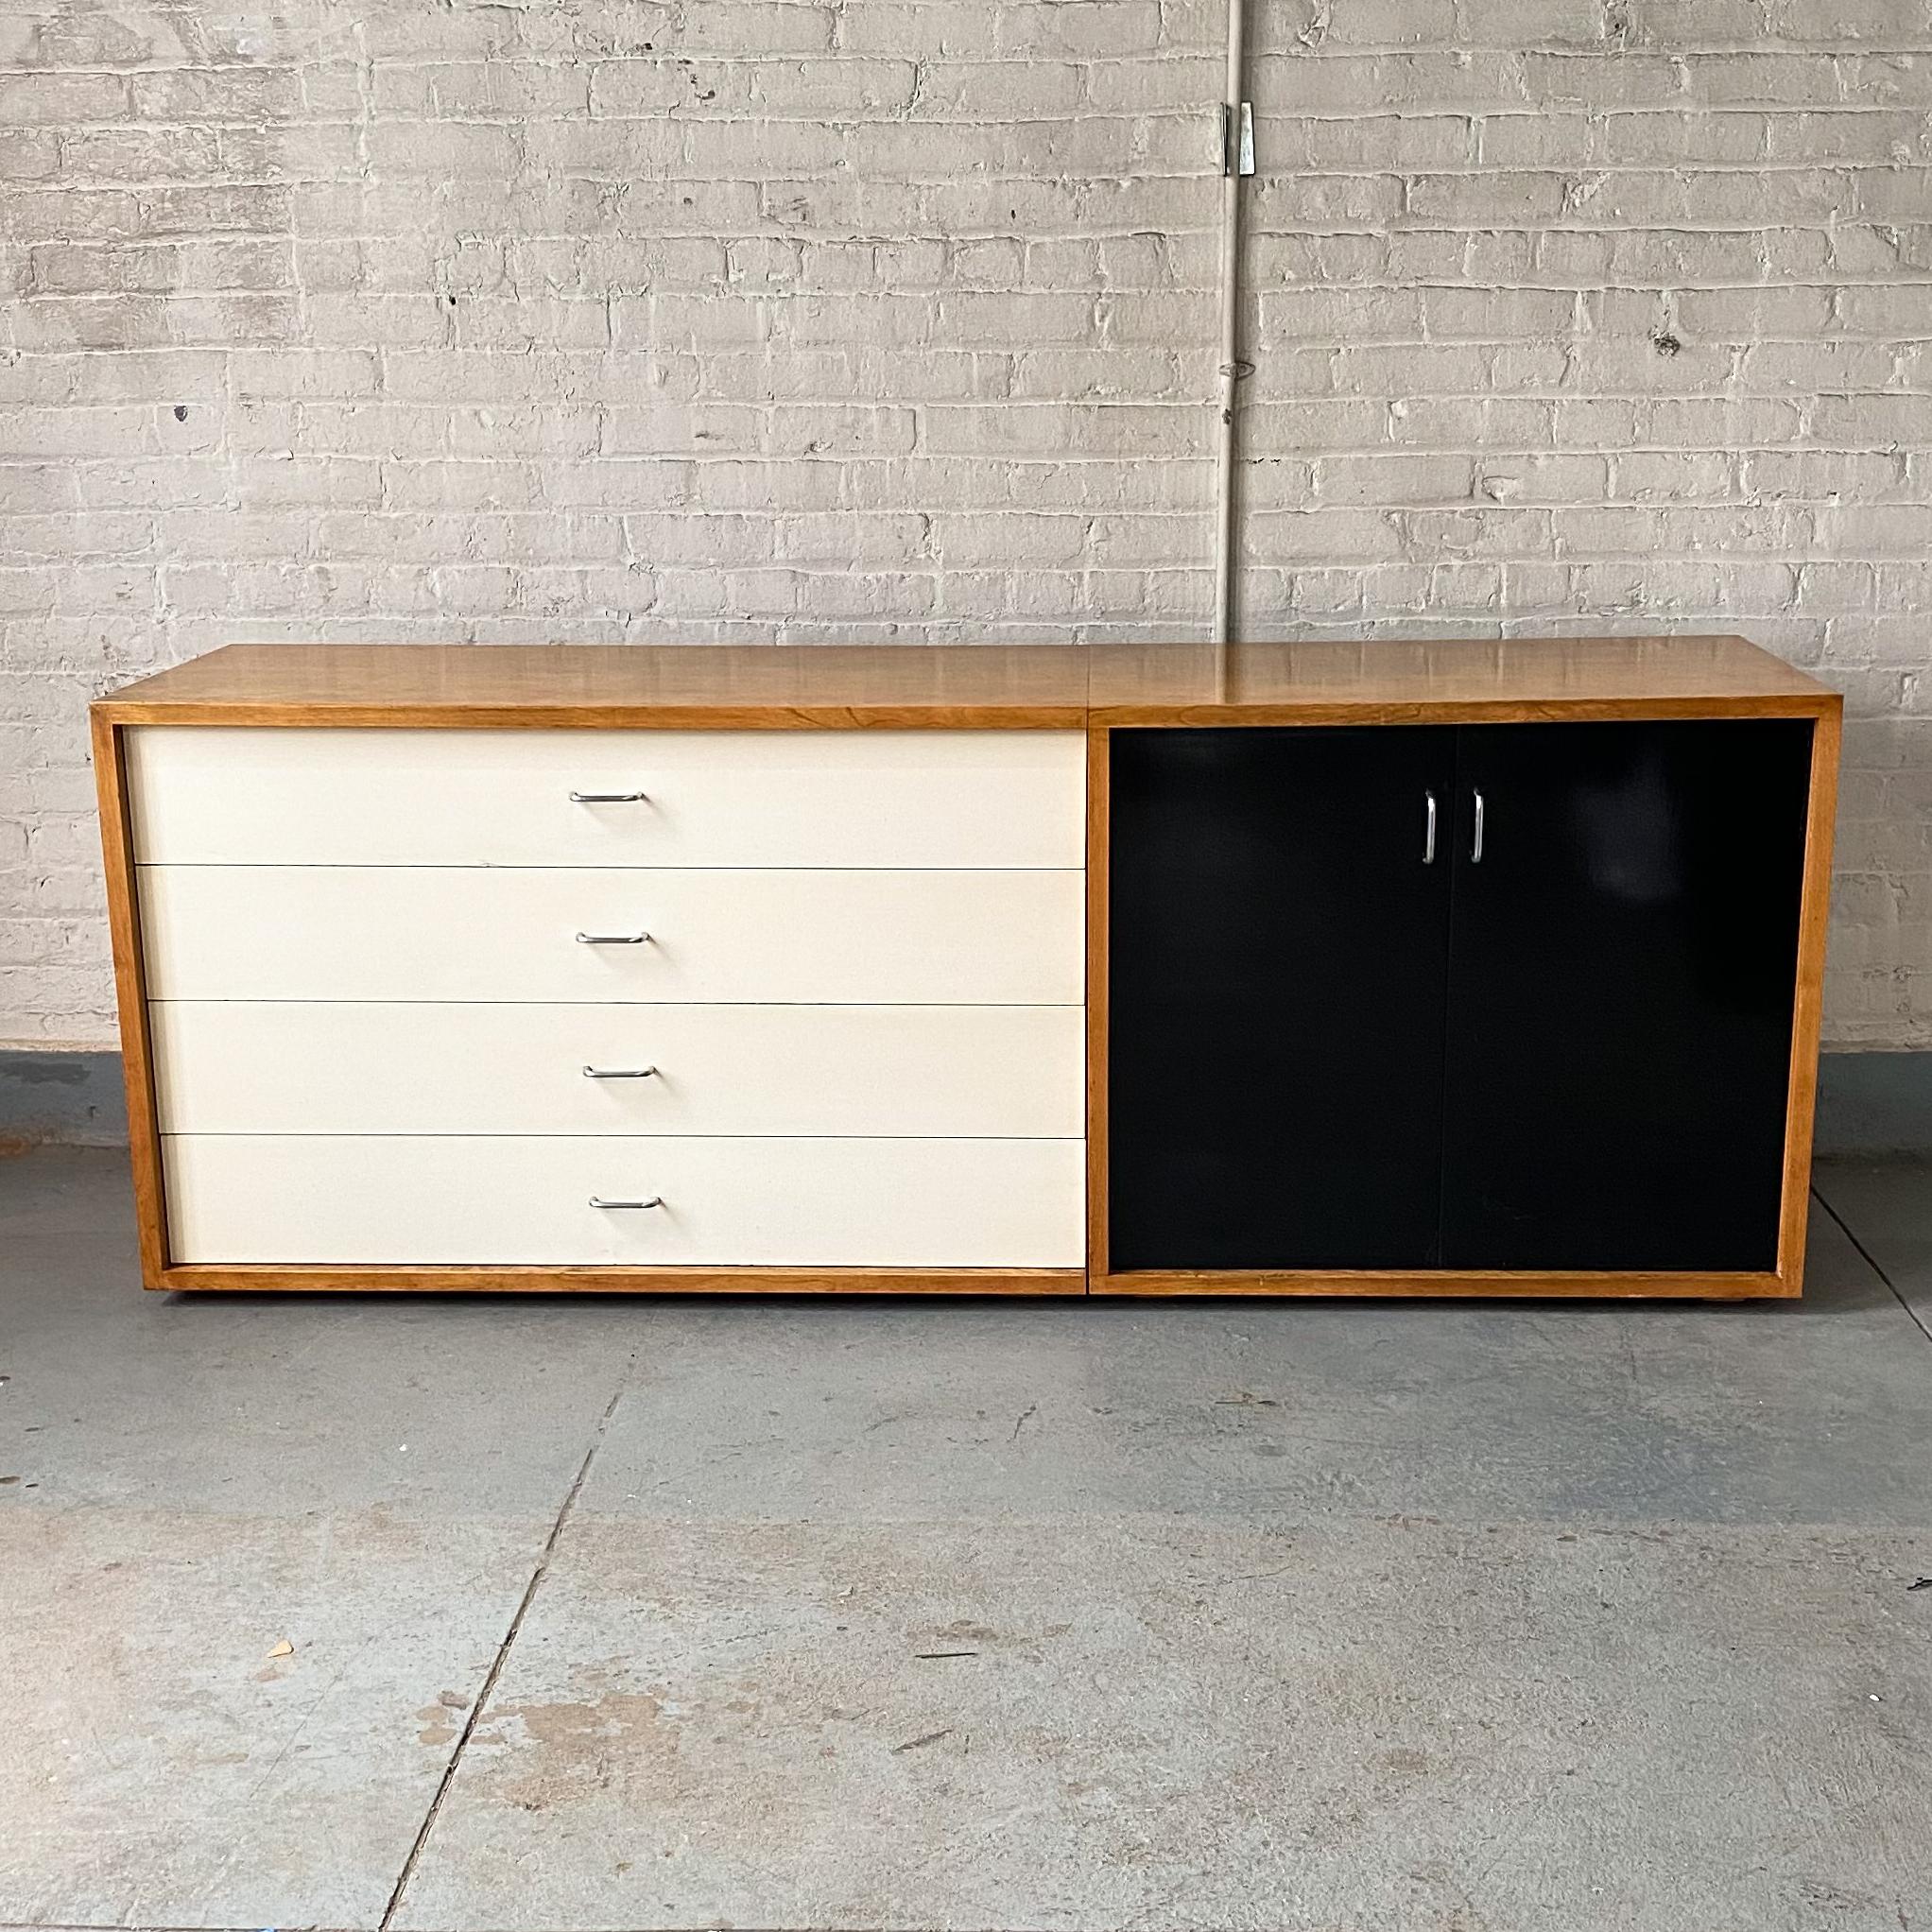 Two-piece custom cabinet of birch with black-and-white lacquered fronts, designed by Elaine Lustig Cohen (1927-2016) circa 1961 for her own townhouse on the Upper East Side in New York City, where it remained until 2018. The simple but graphically